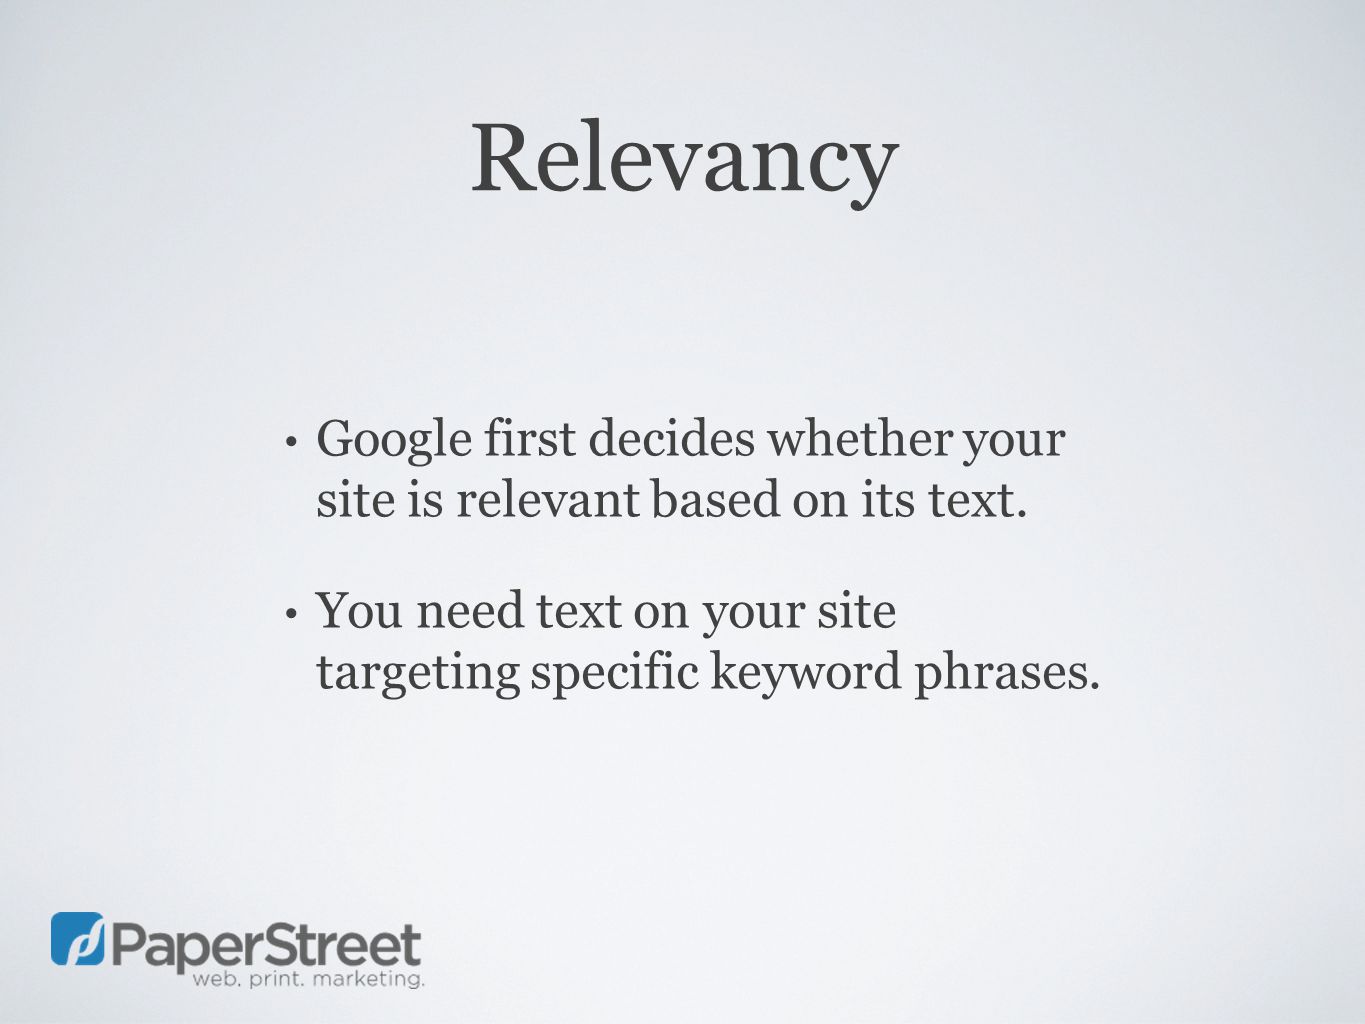 Relevancy Google first decides whether your site is relevant based on its text.